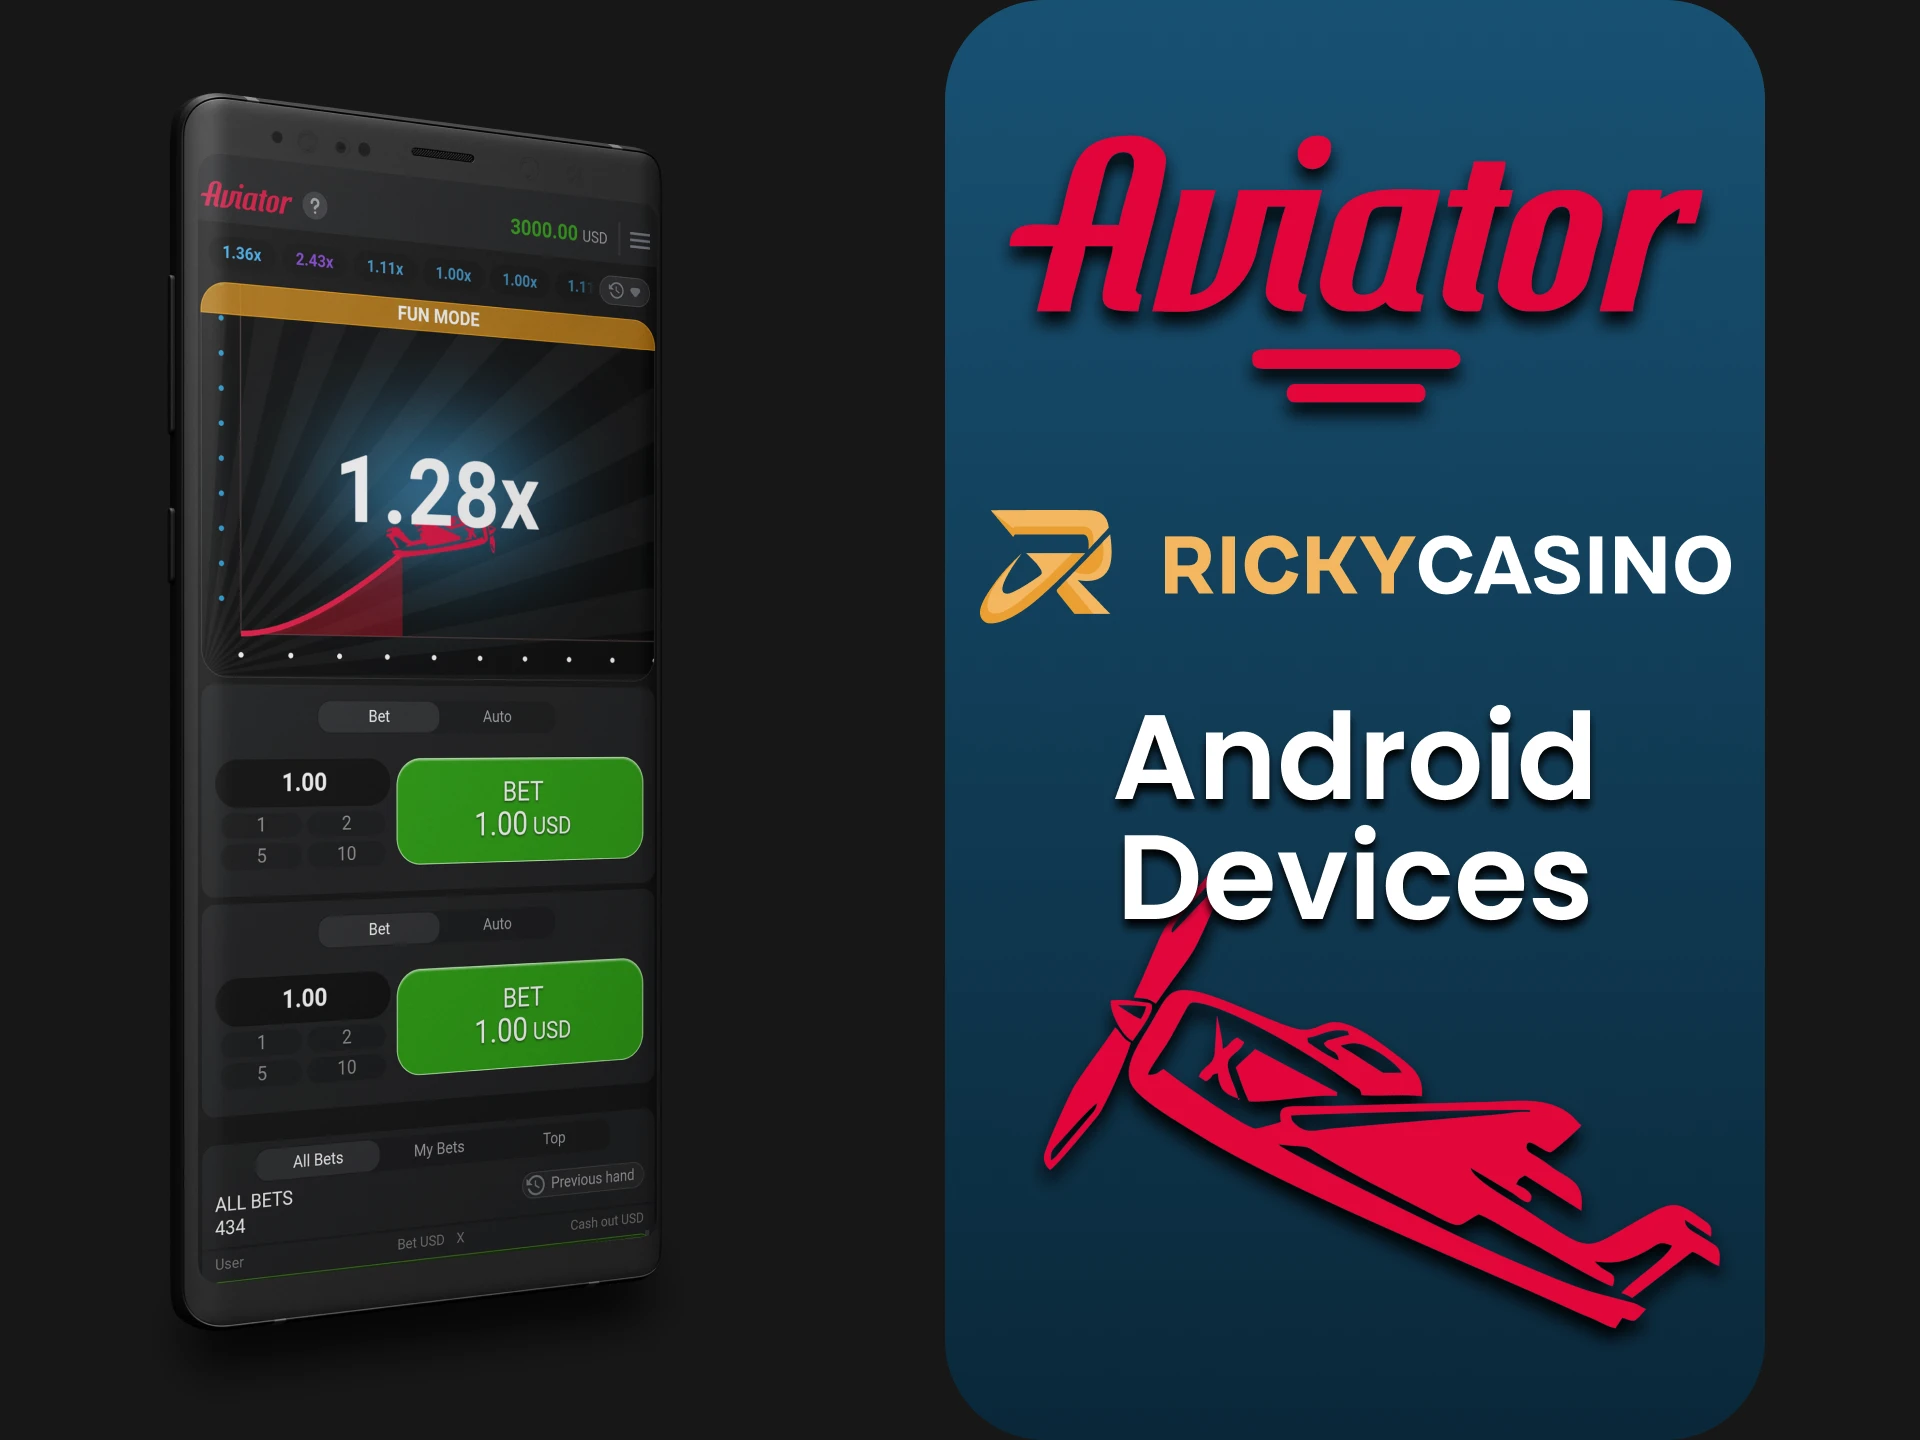 Download the Ricky Casino app to play Aviator on iOS.